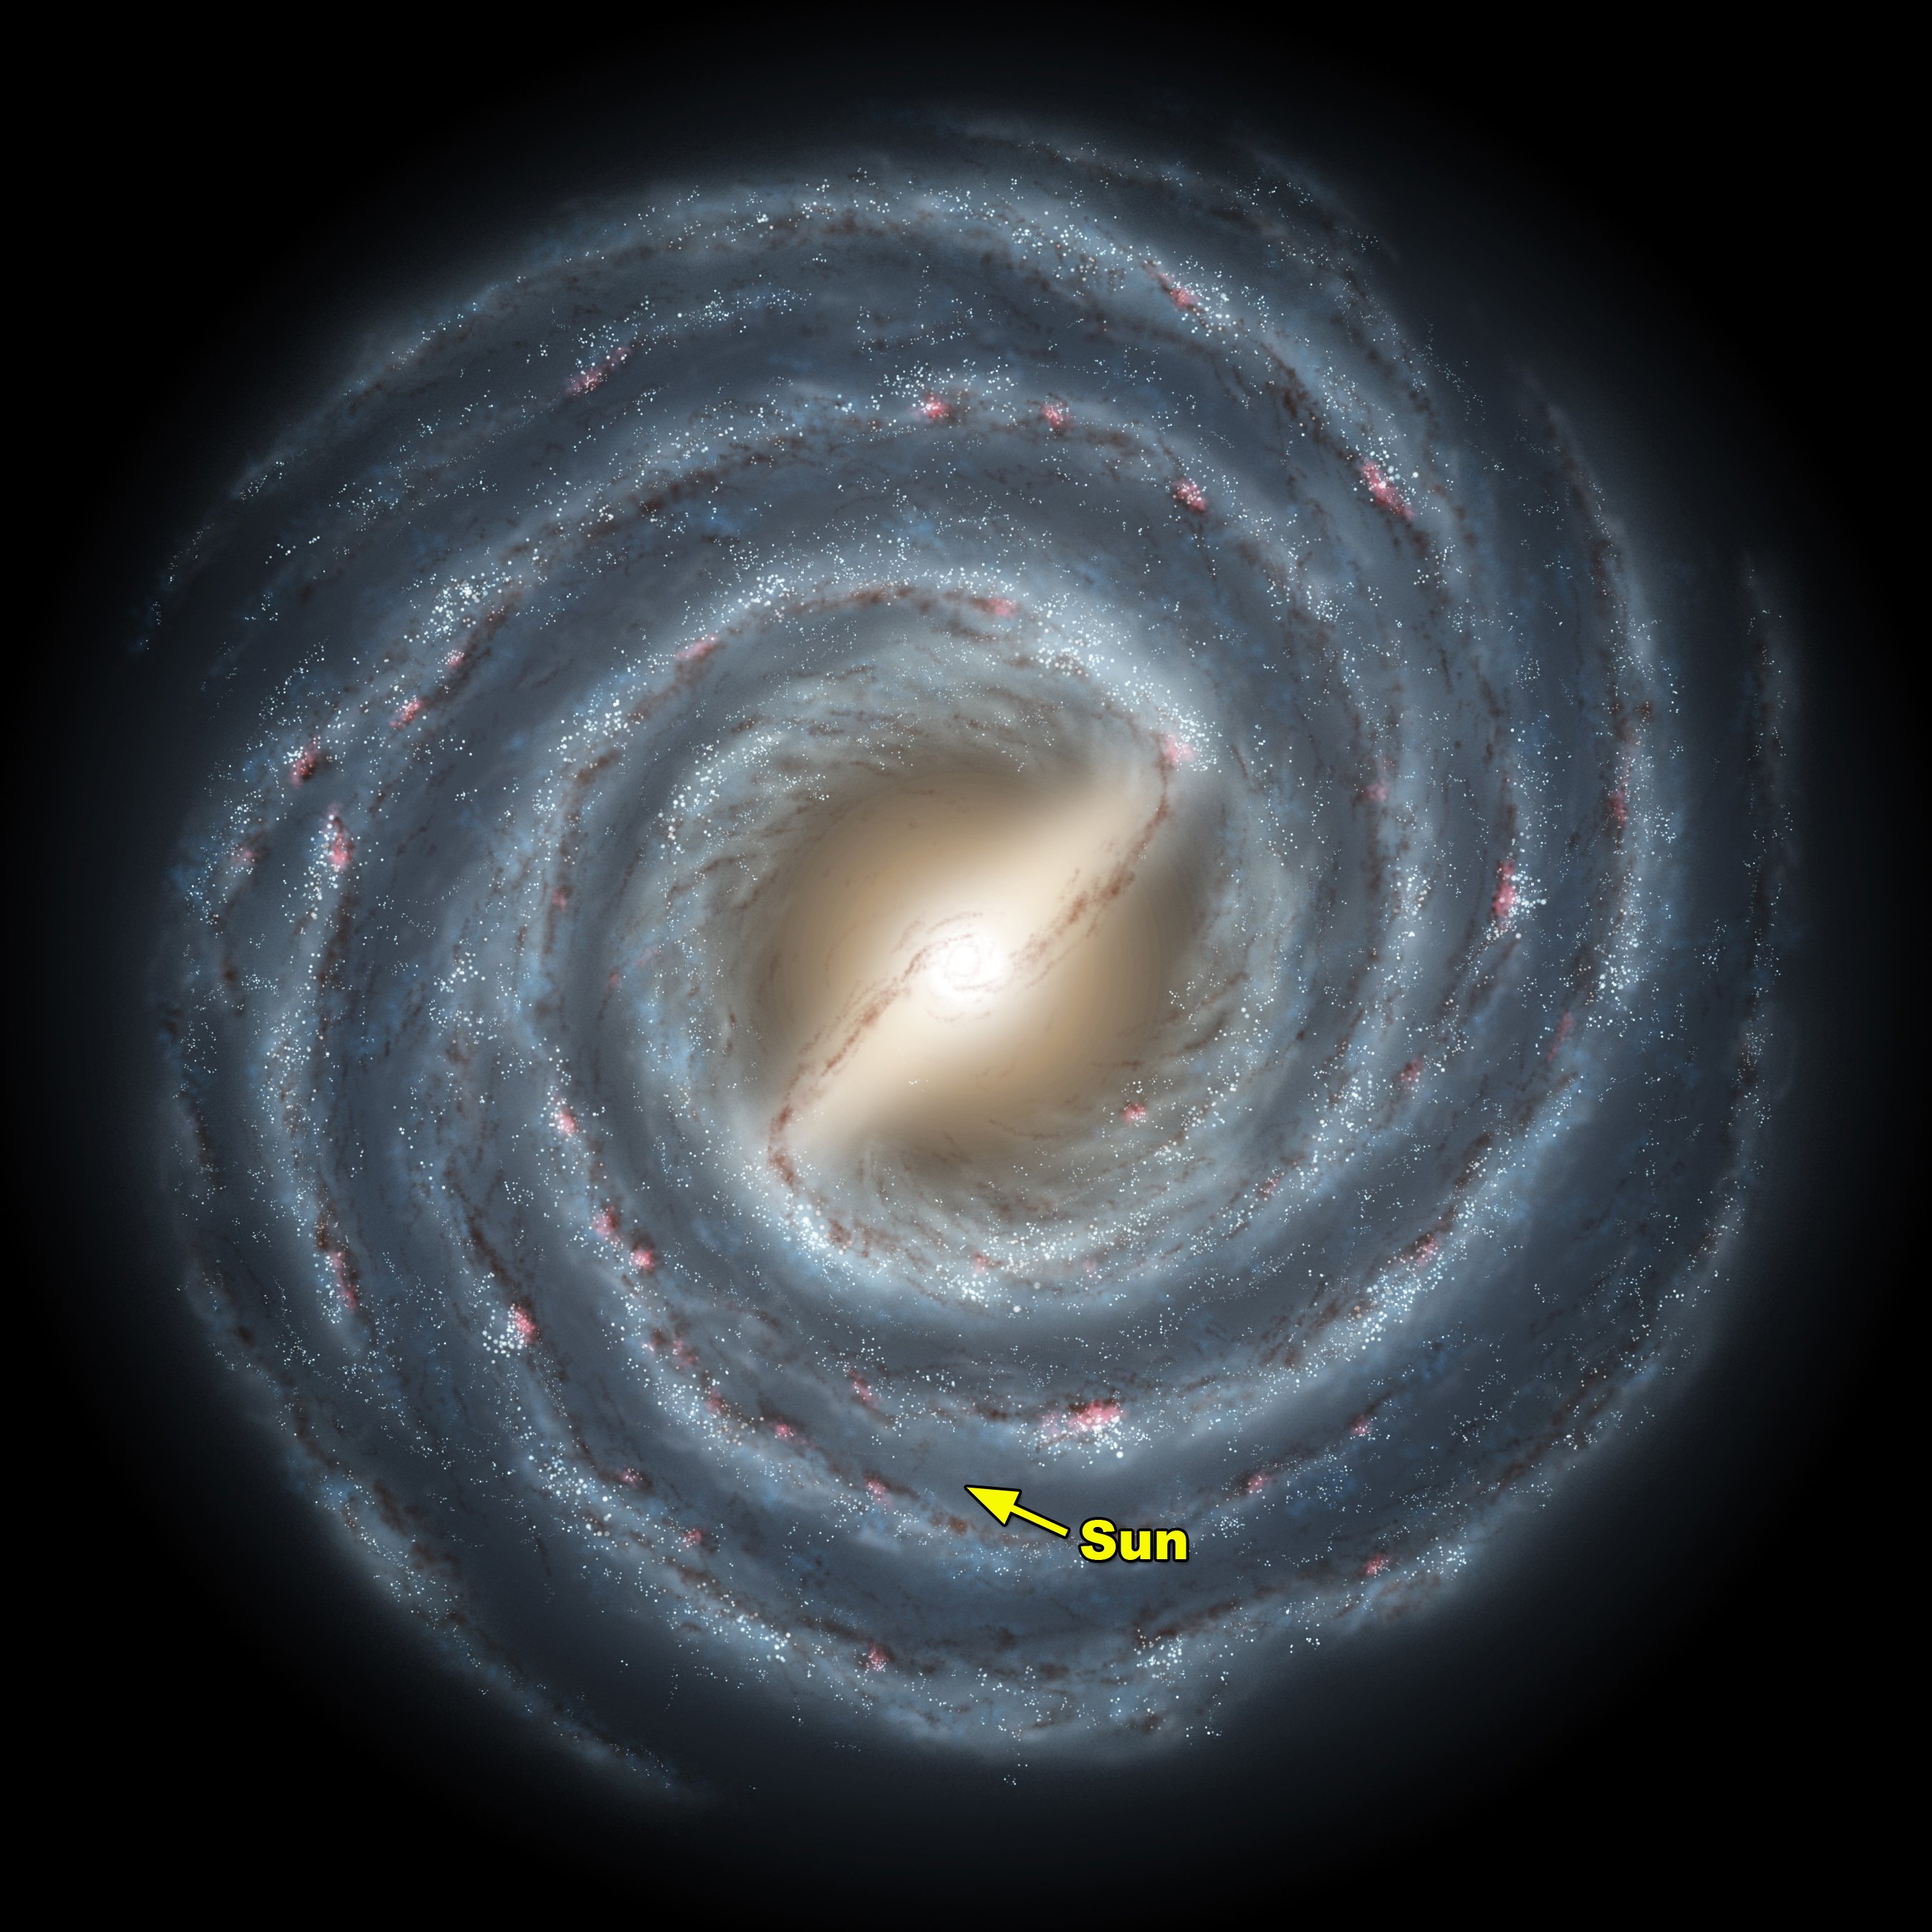 An artist's impression illustrating the position of the Sun and our solar system within the Milky Way.